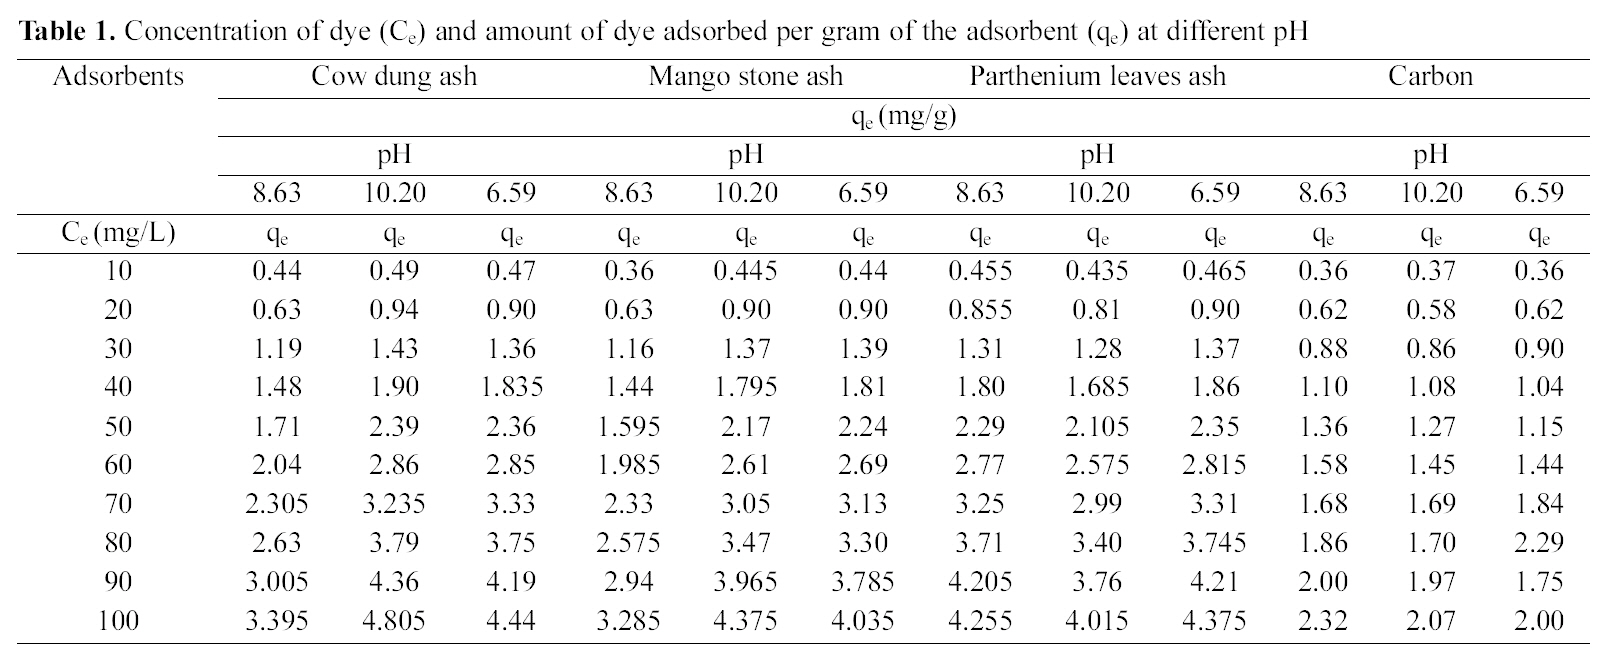 Concentration of dye (Ce) and amount of dye adsorbed per gram of the adsorbent (qe) at different pH